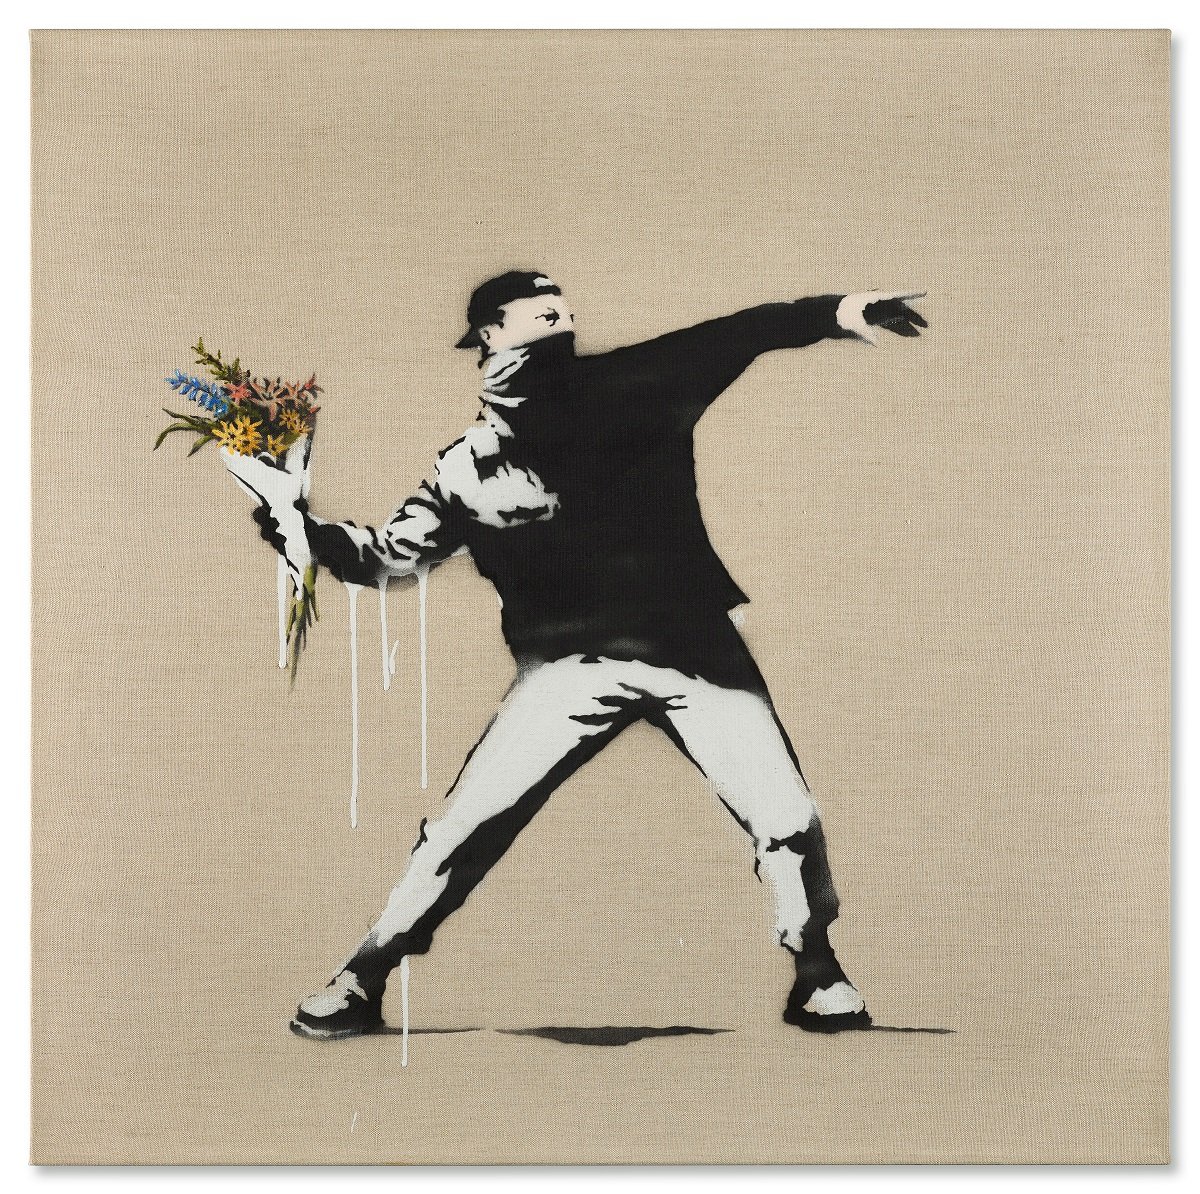 Banksy, Love is in the air (2006). Courtesy of Sotheby's